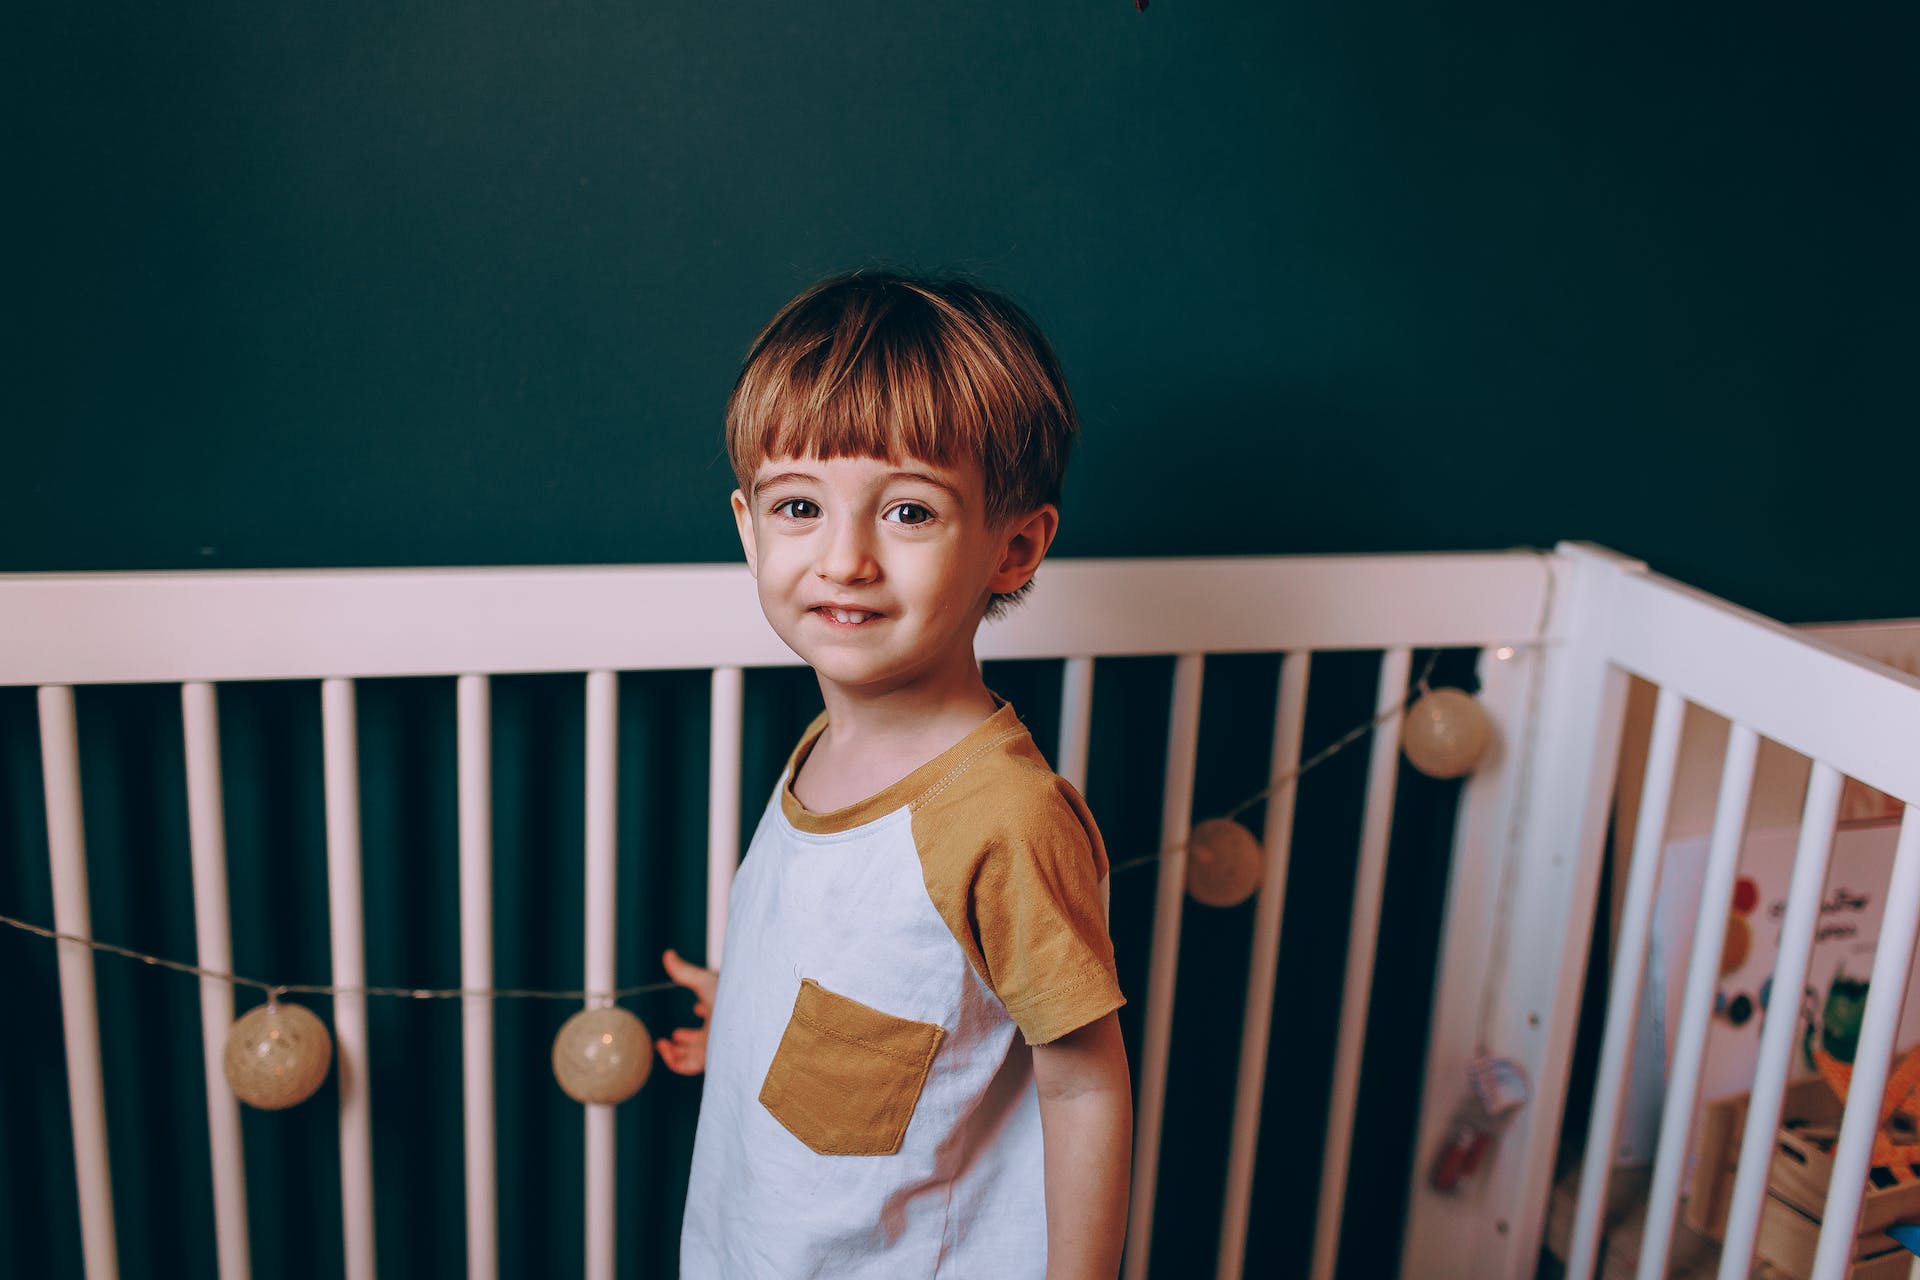 A child standing in a crib | Source: Pexels